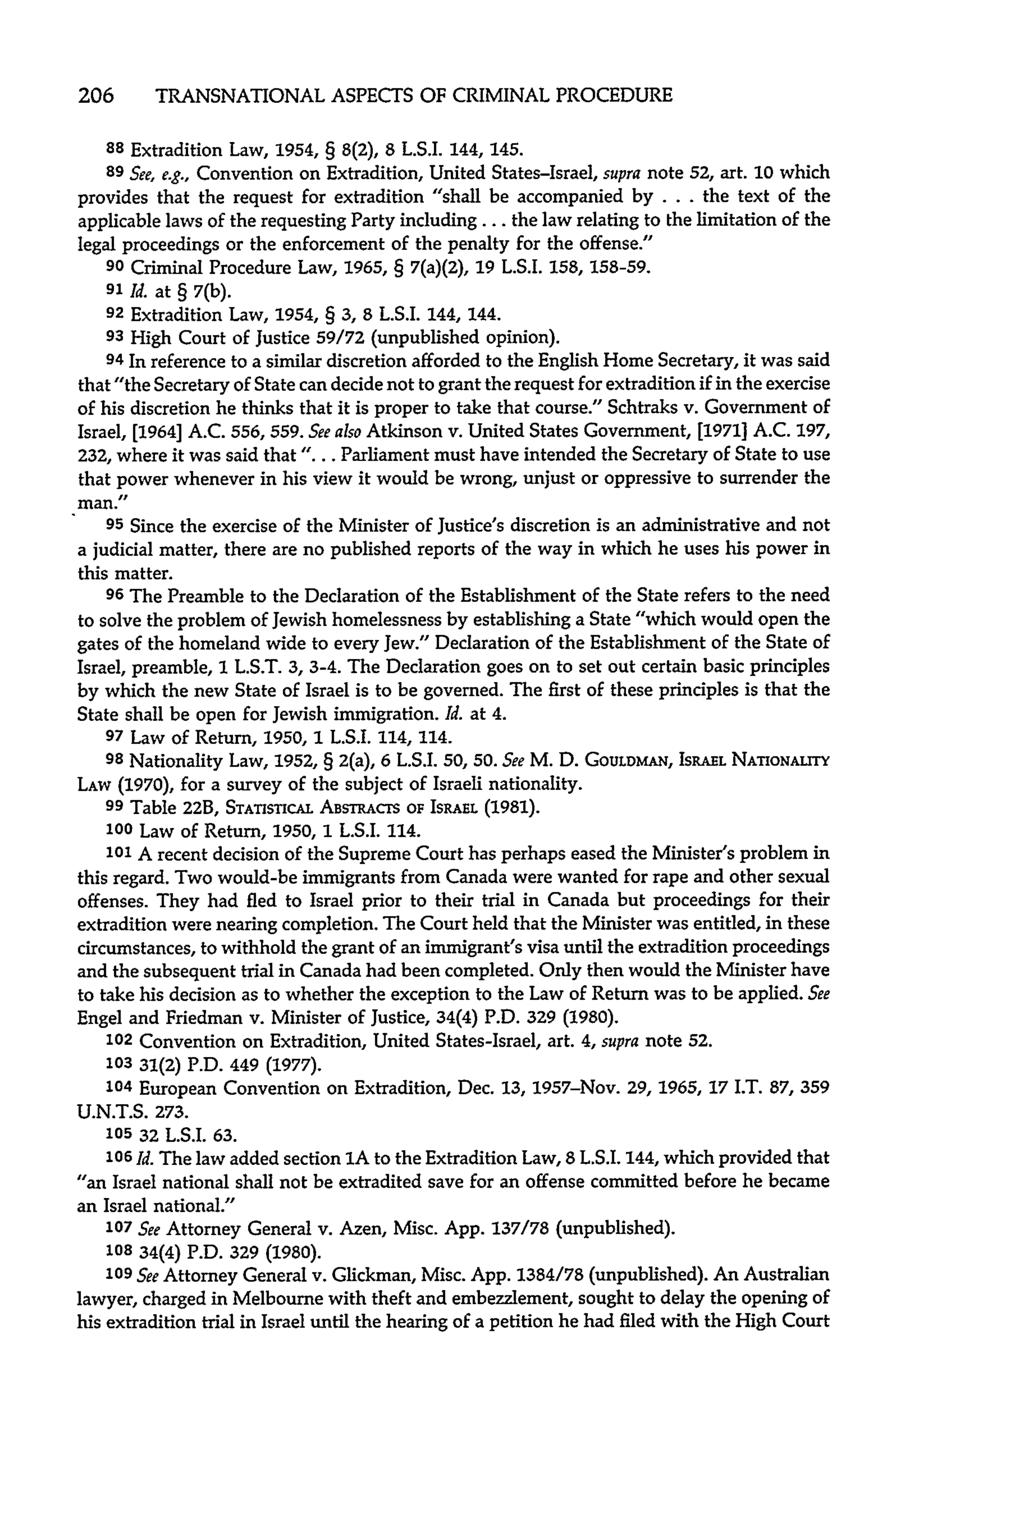 206 TRANSNATIONAL ASPECTS OF CRIMINAL PROCEDURE 88 Extradition Law, 1954, 8(2), 8 L.S.I. 144, 145. 89 See, e.g., Convention on Extradition, United States-Israel, supra note 52, art.